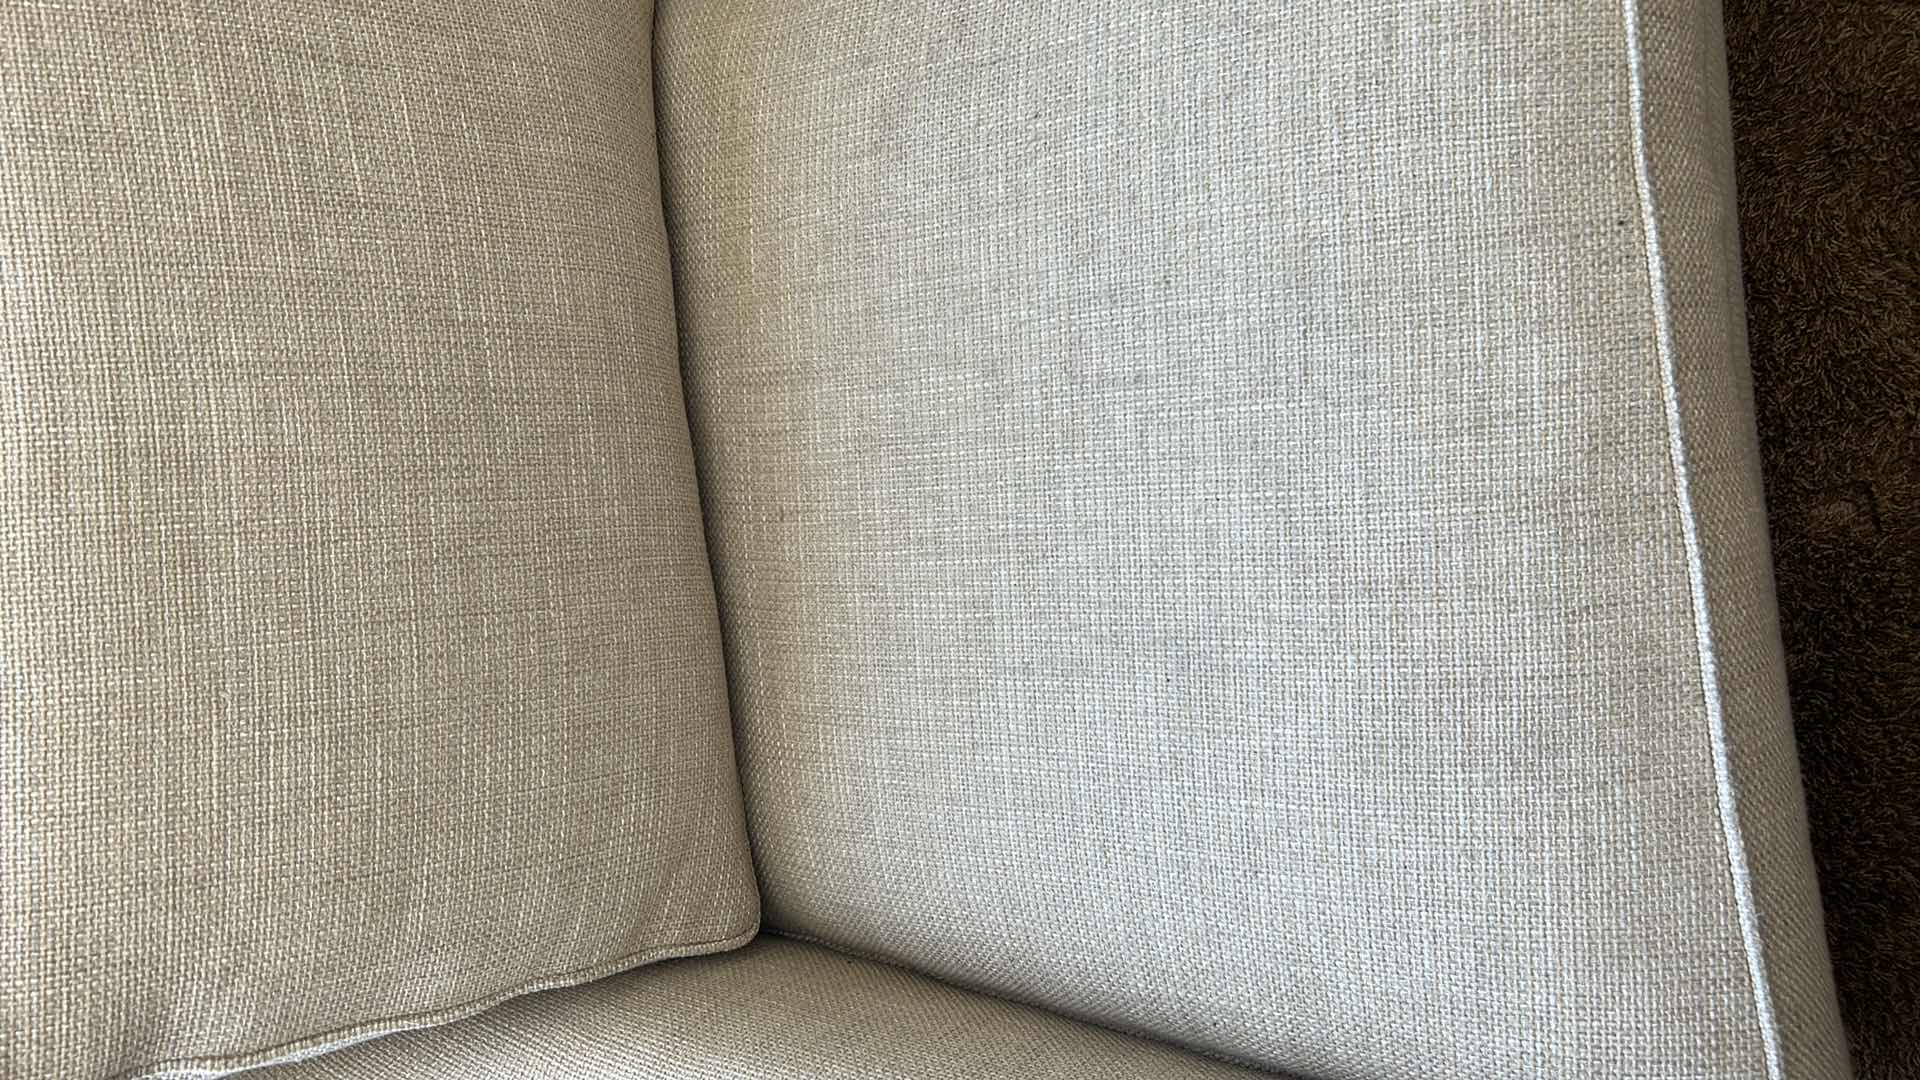 Photo 3 of 7' SOFA-  LEXINGTON UPHOLSTERY MADE IN USA OFF WHITE TEXTURED LINEN WITH NAIL HEAD FINISH